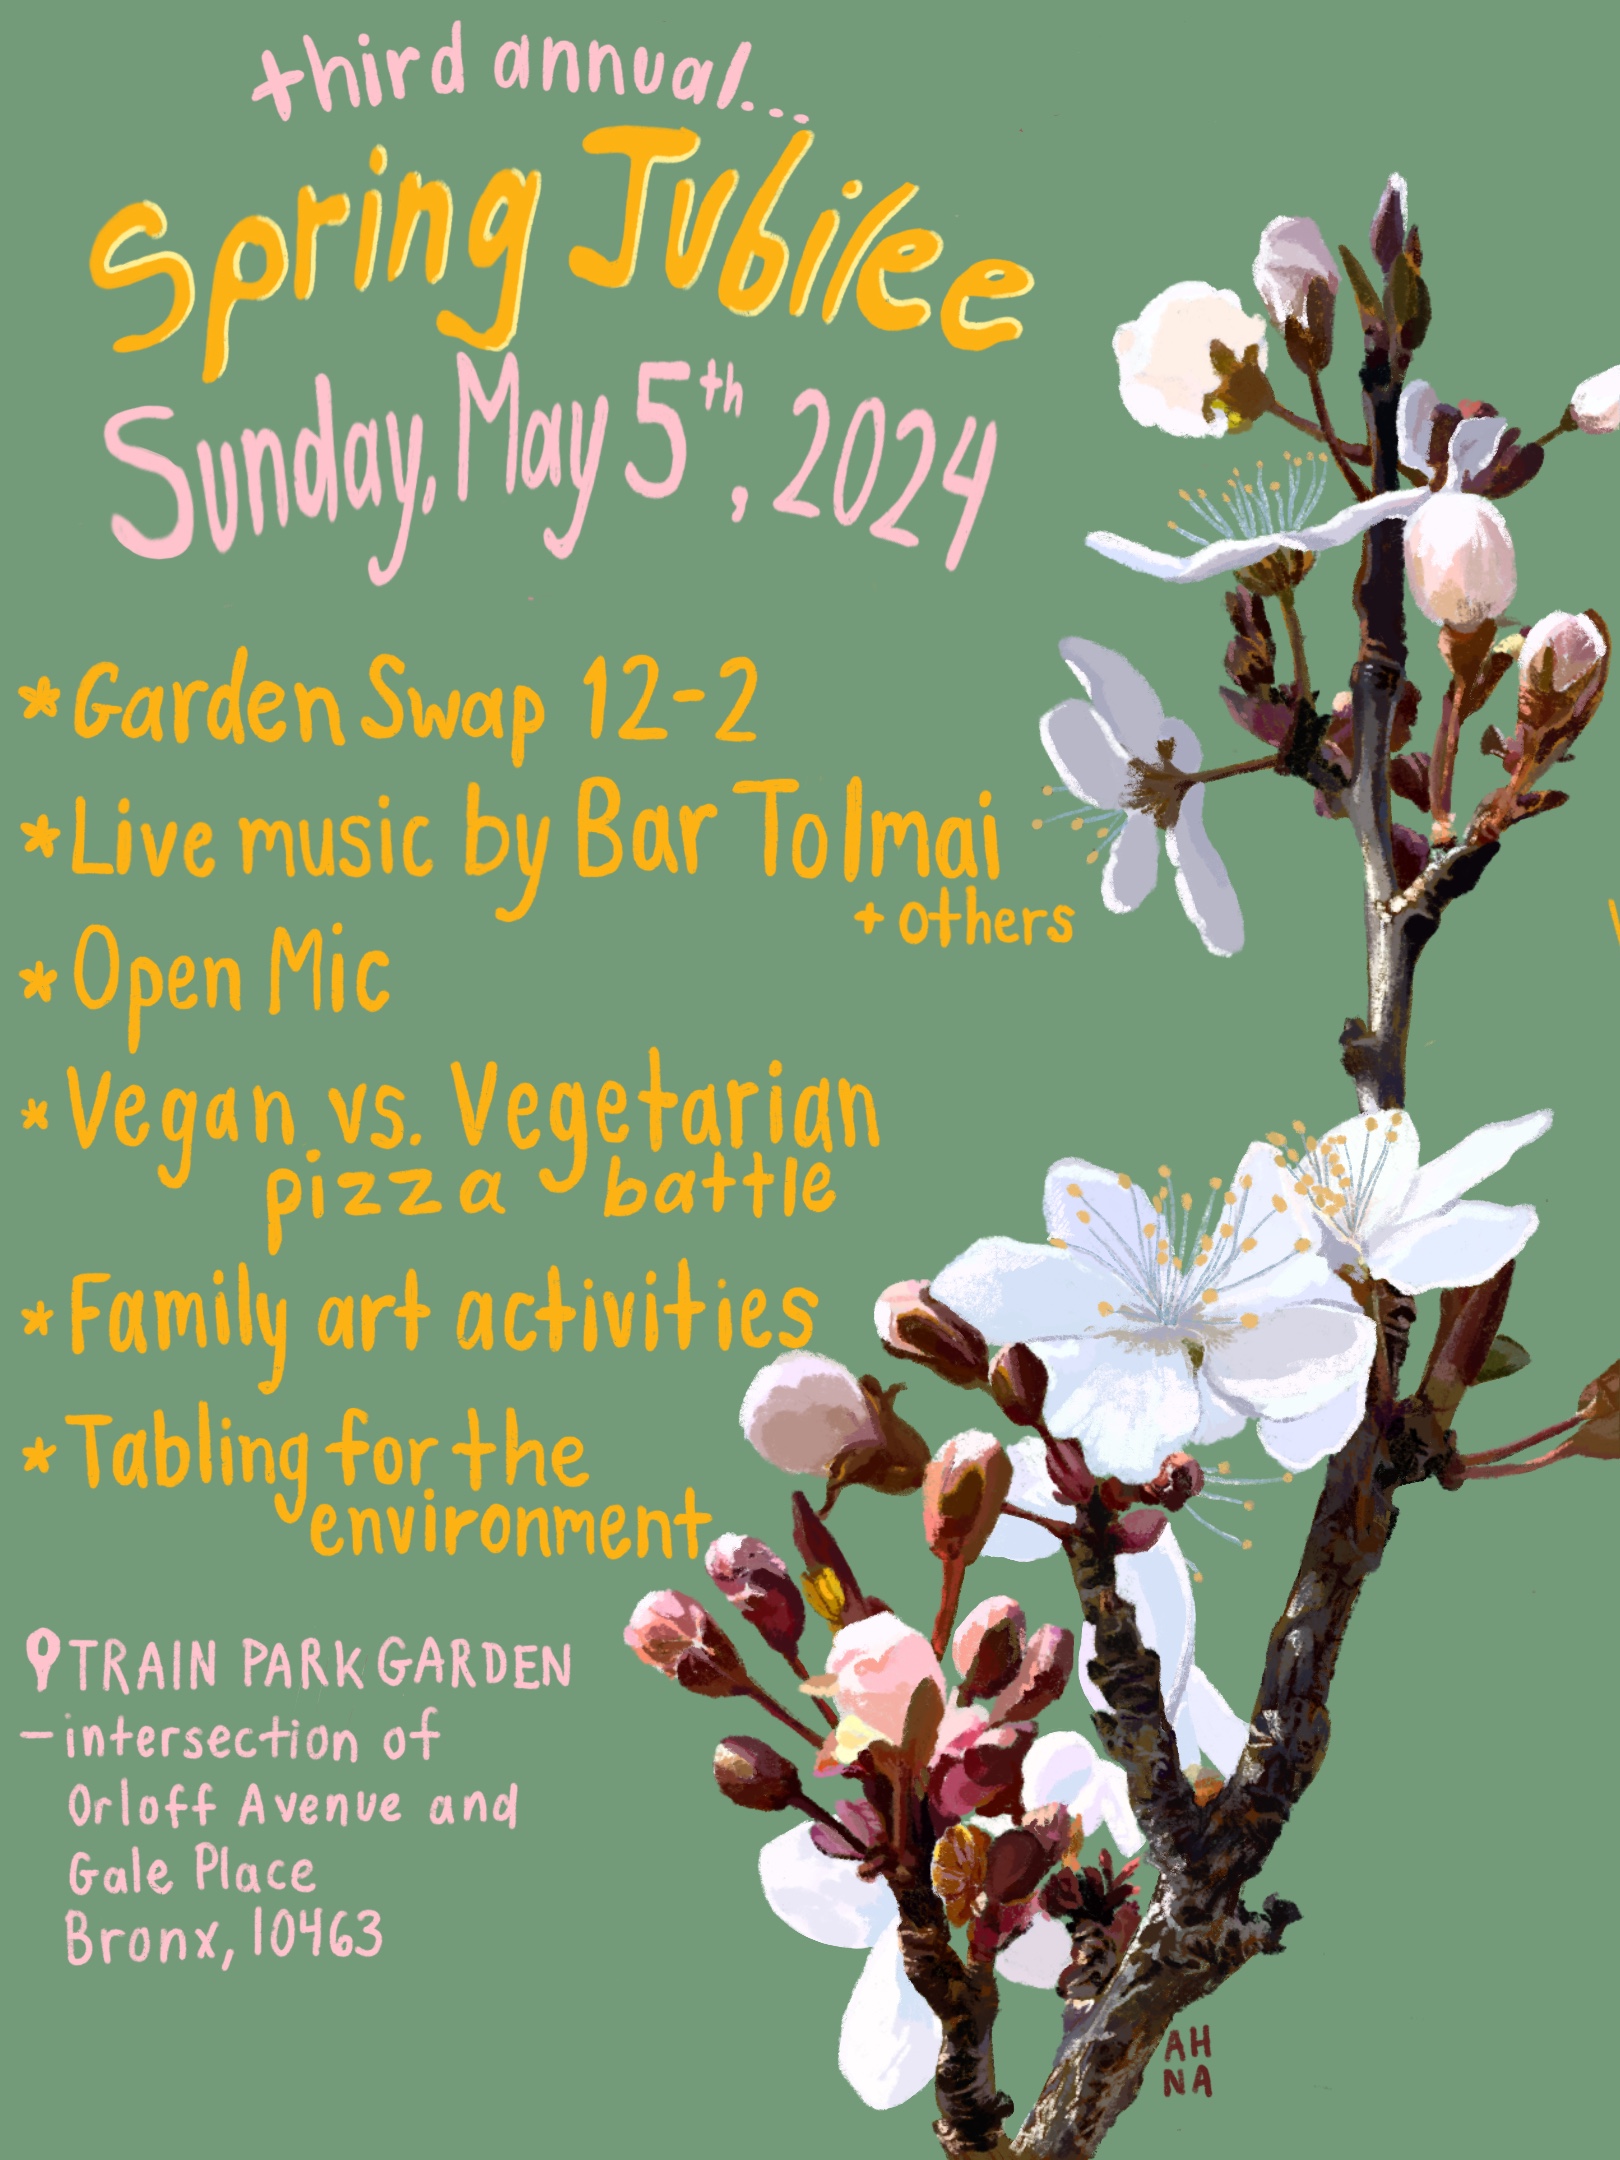 Spring Jubilee May 5th at the Amalgamated train park